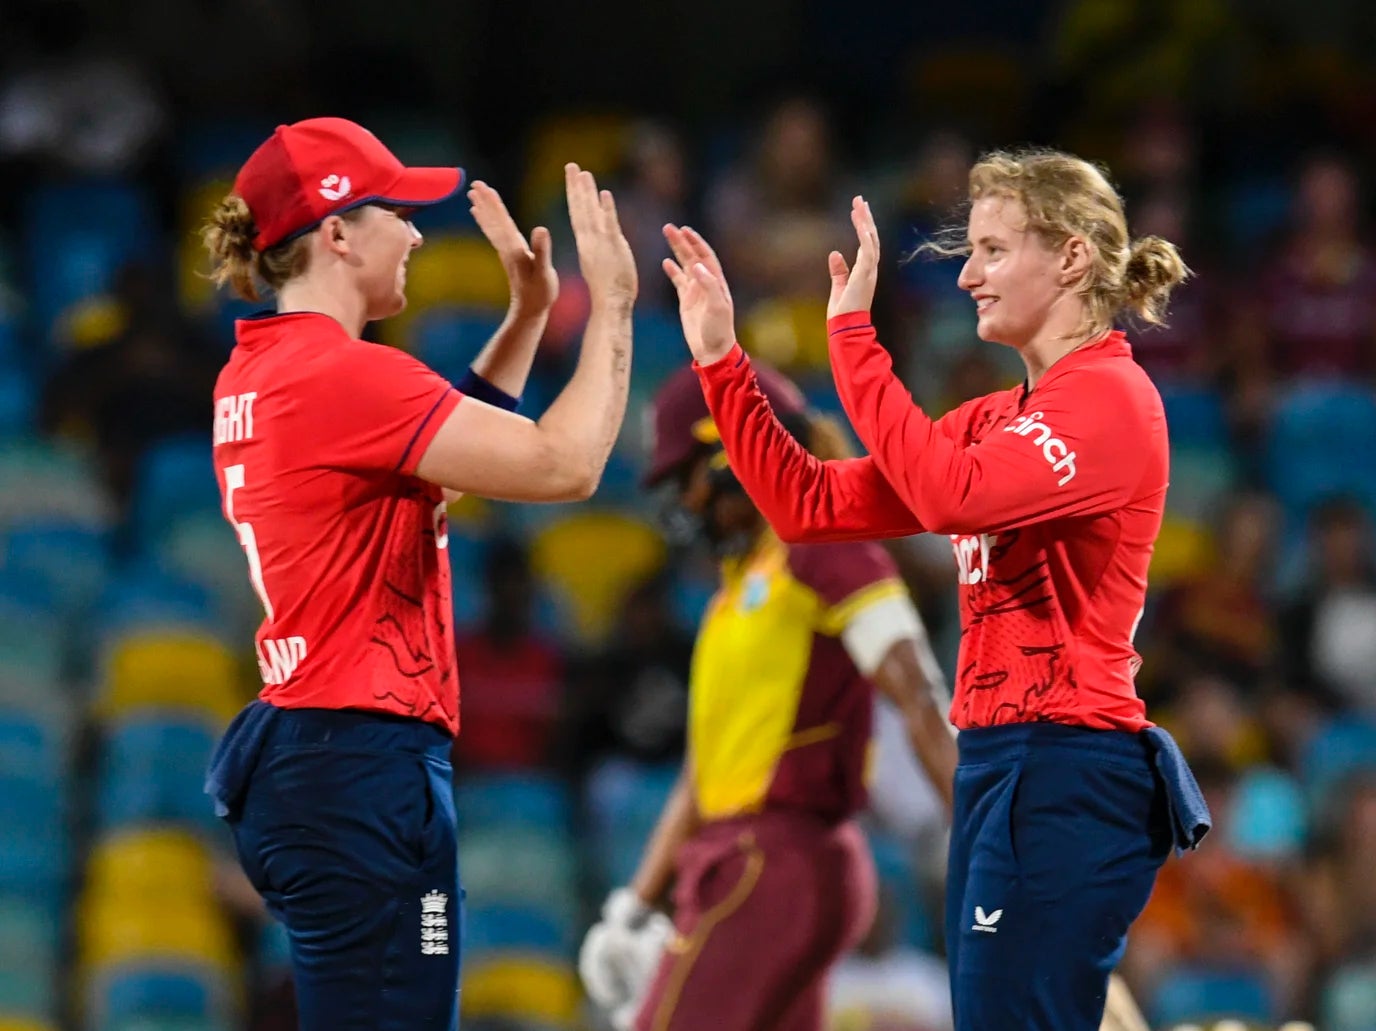 All-rounder Charlie Dean had a double-wicket maiden as part of her four-for